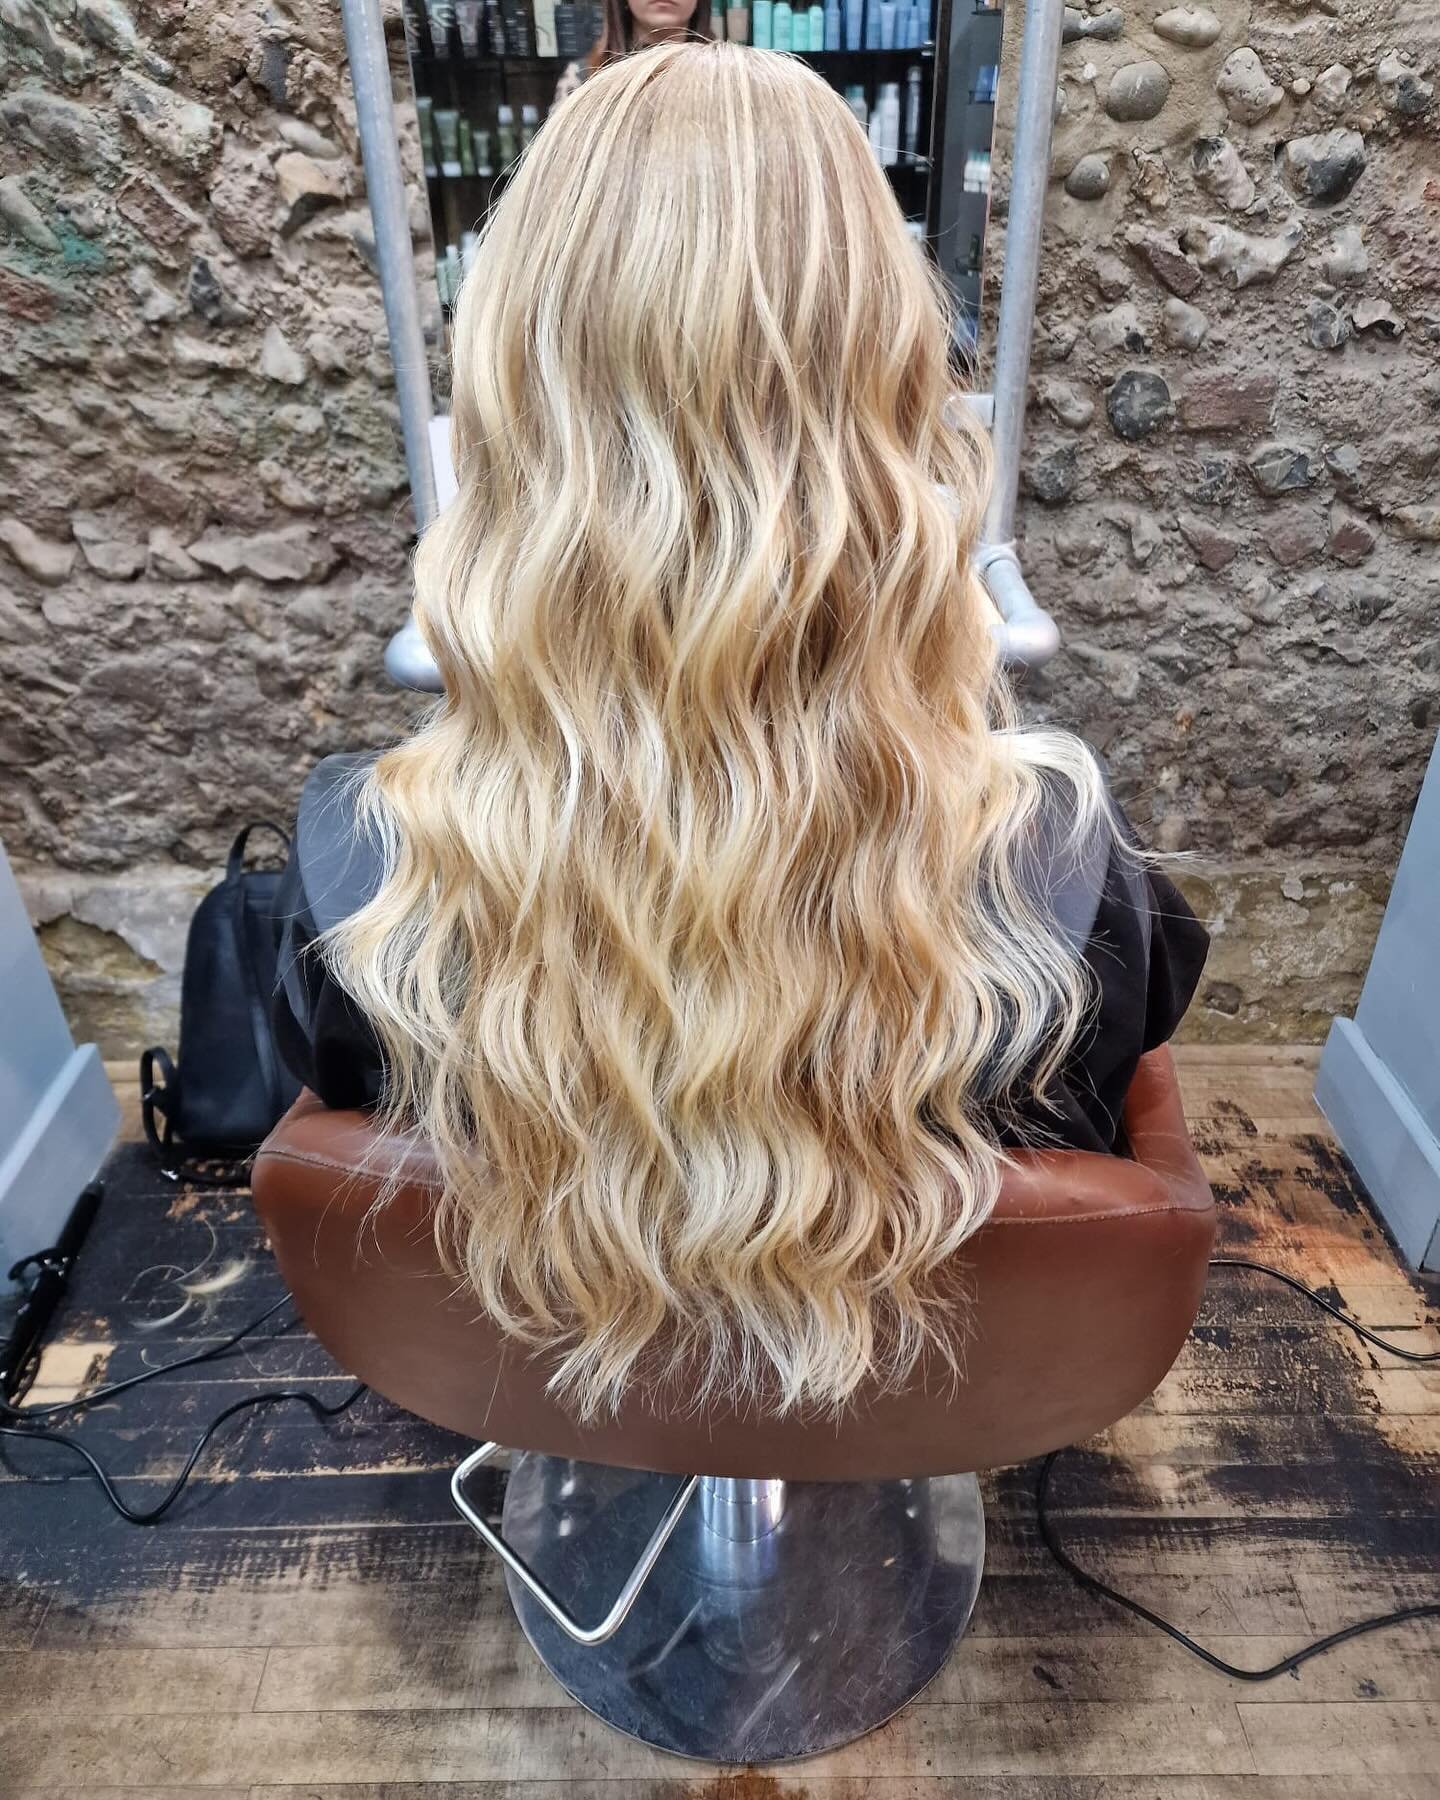 Embracing all this glorious sunshine with endless sun-kissed waves. Beautiful balayage courtesy of Cecilia, cut and blow dry by Veronica 💫

#balayage #blondewaves #avedacolourist #haircolourtrends #wavyhair #summerhair #avedasalon #avedabrighton #br